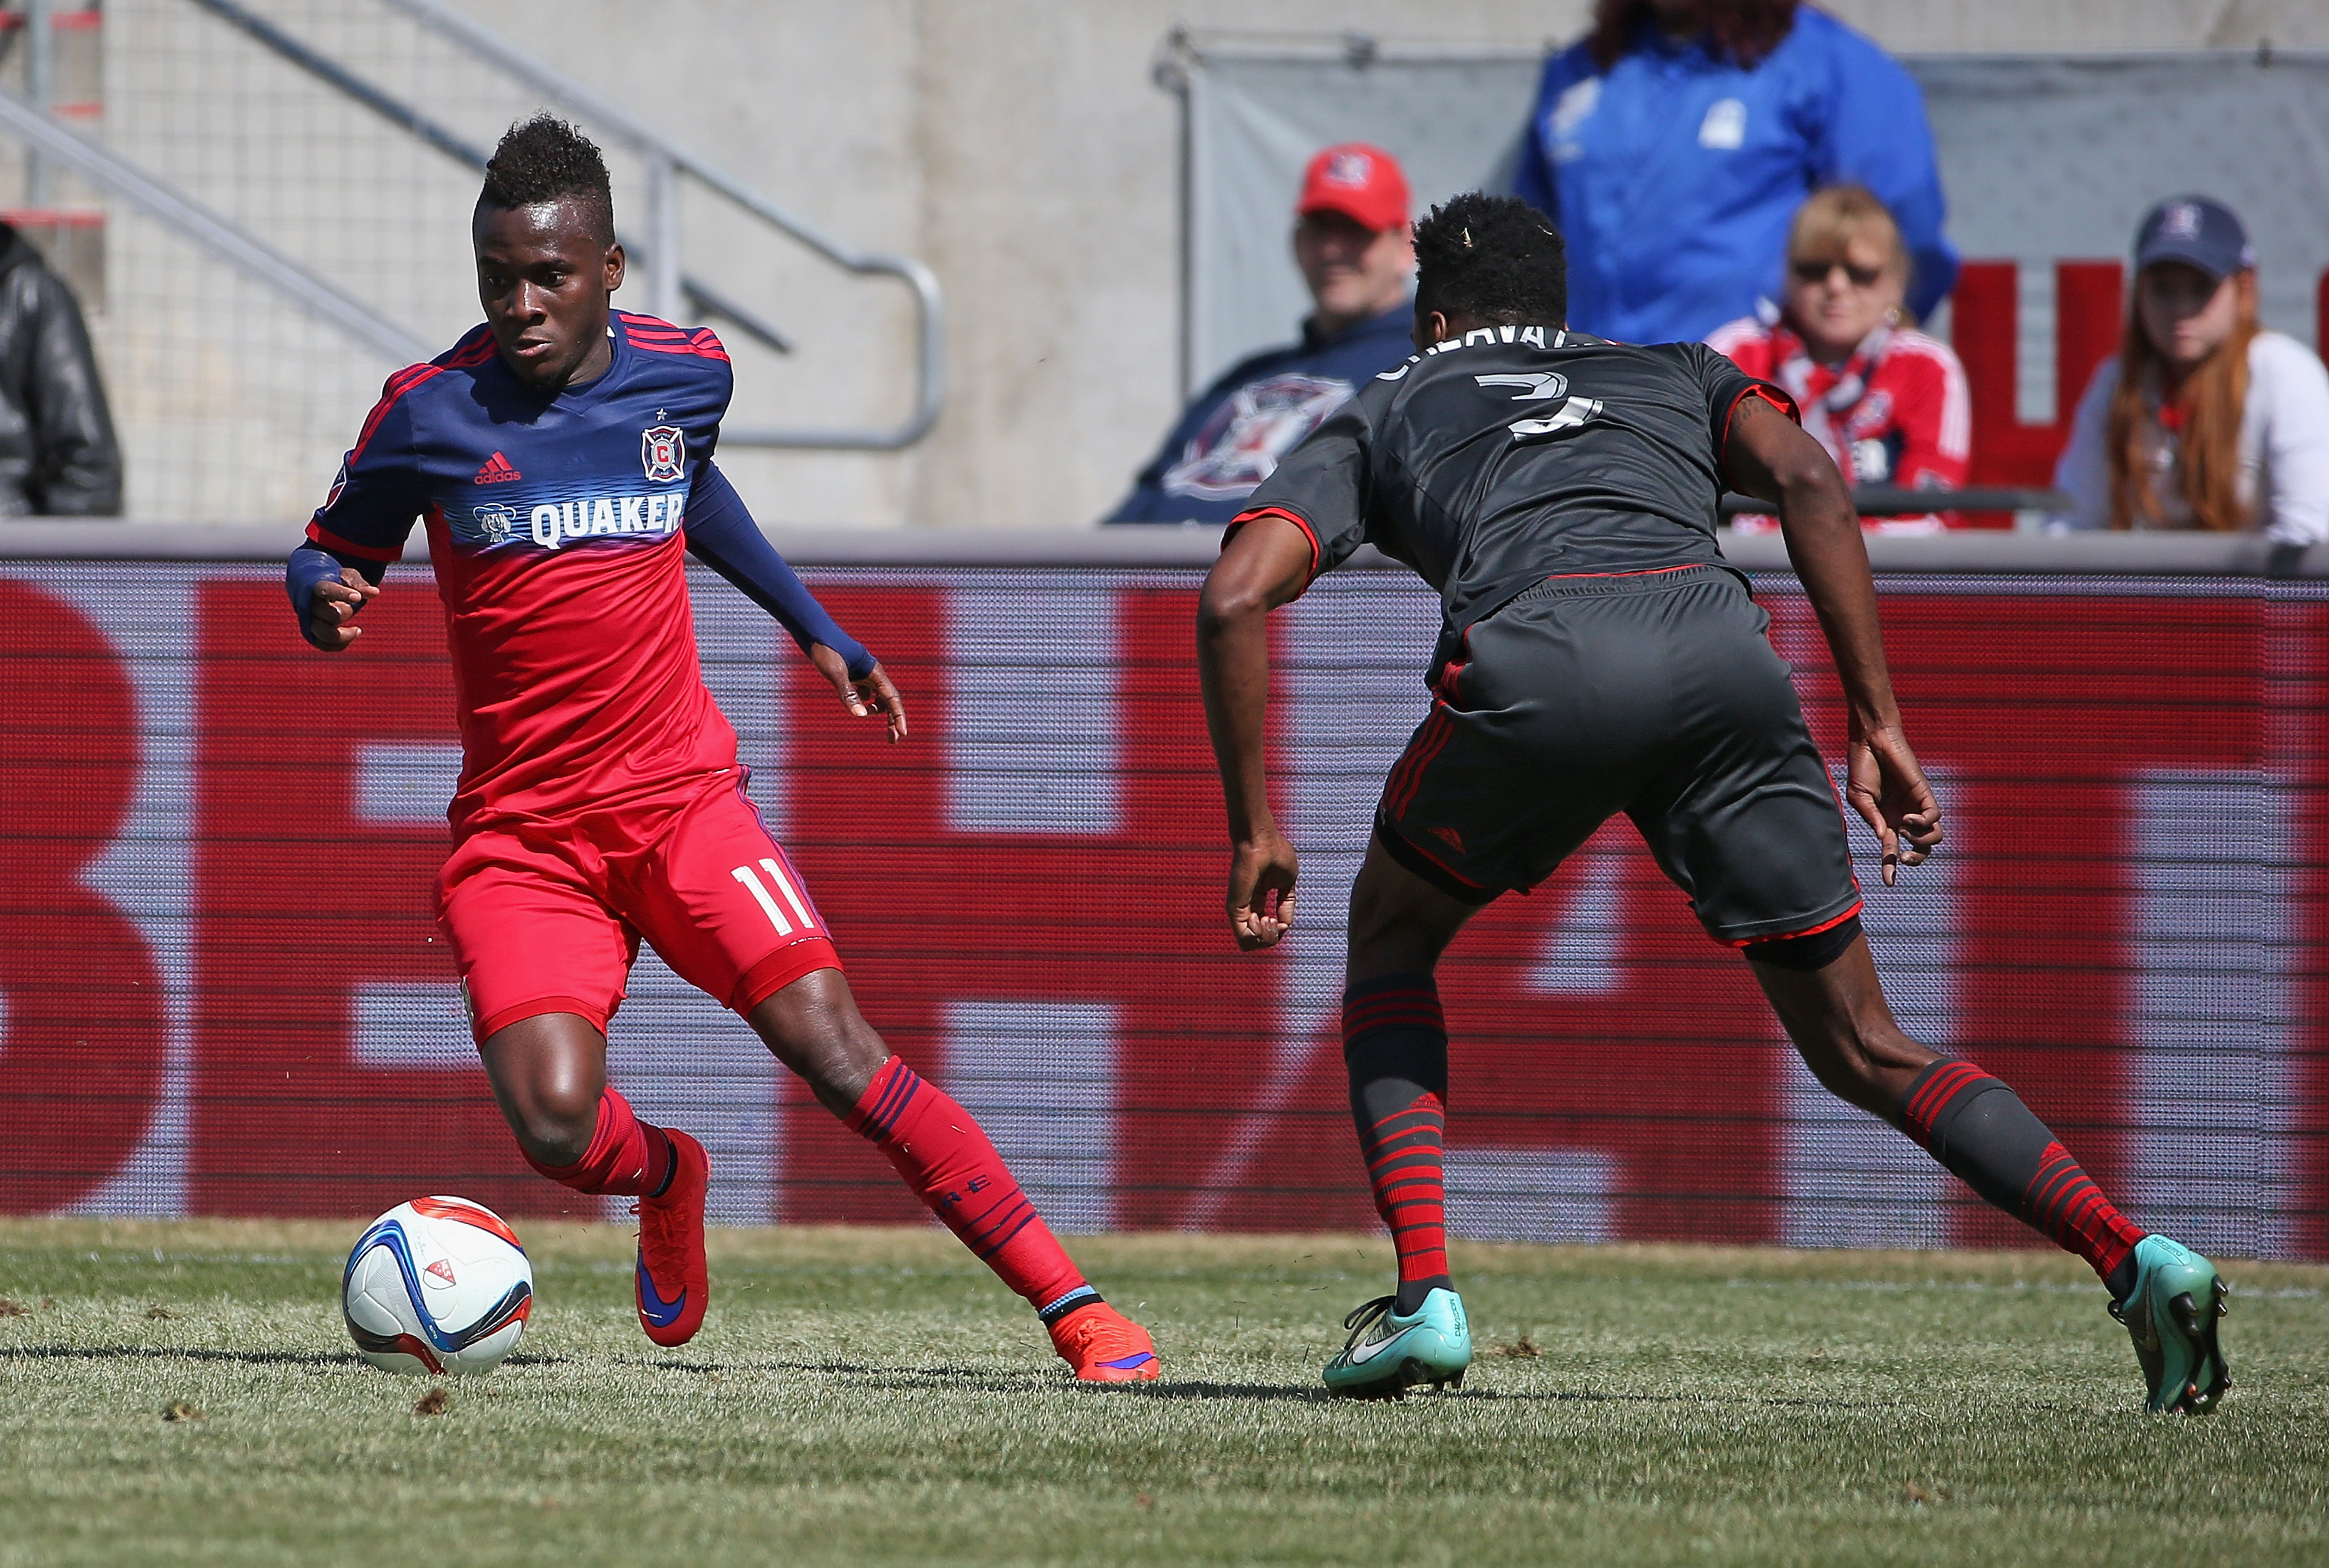 Chicago Fire will be bonafide contenders with David Accam